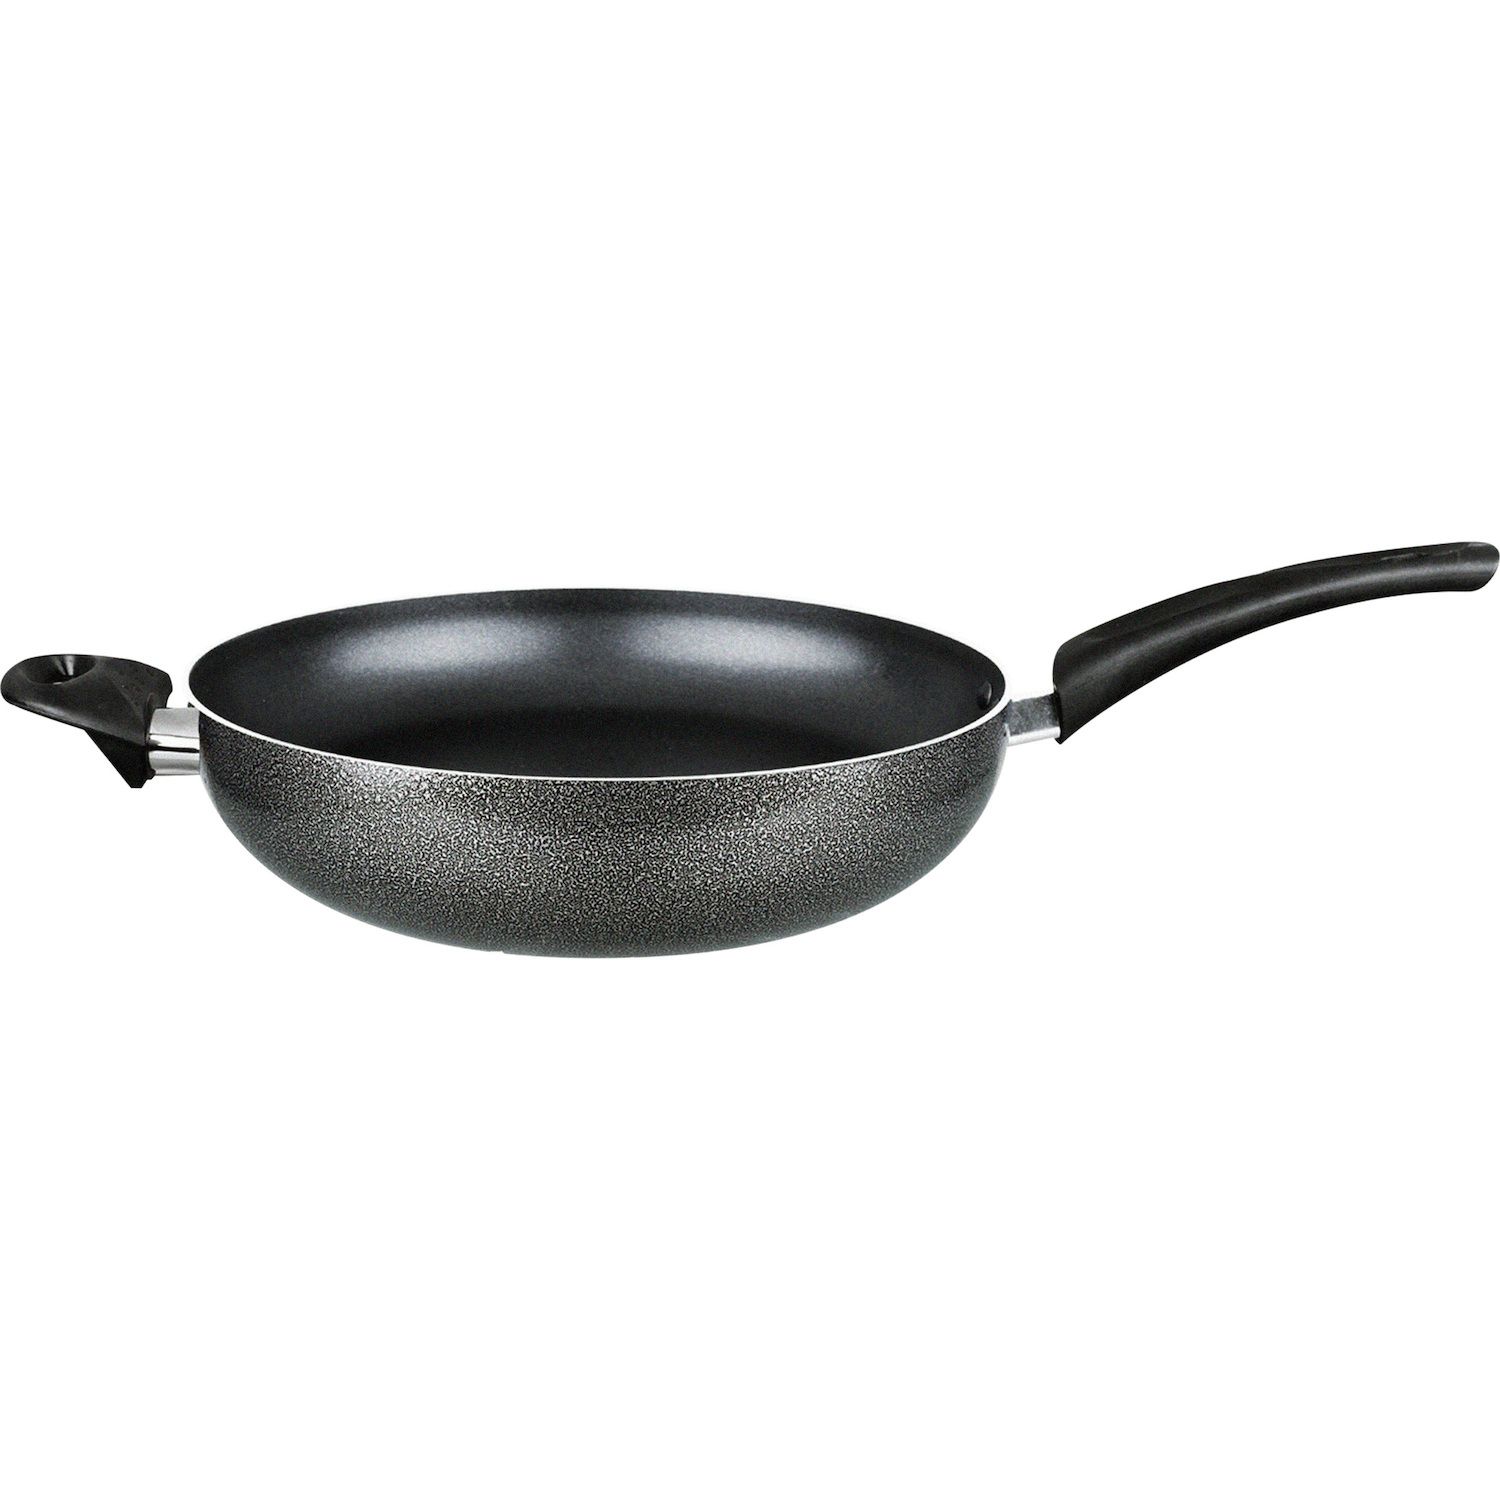 Brentwood 12 Round Non-Stick Electric Skillet with Vented Glass Lid